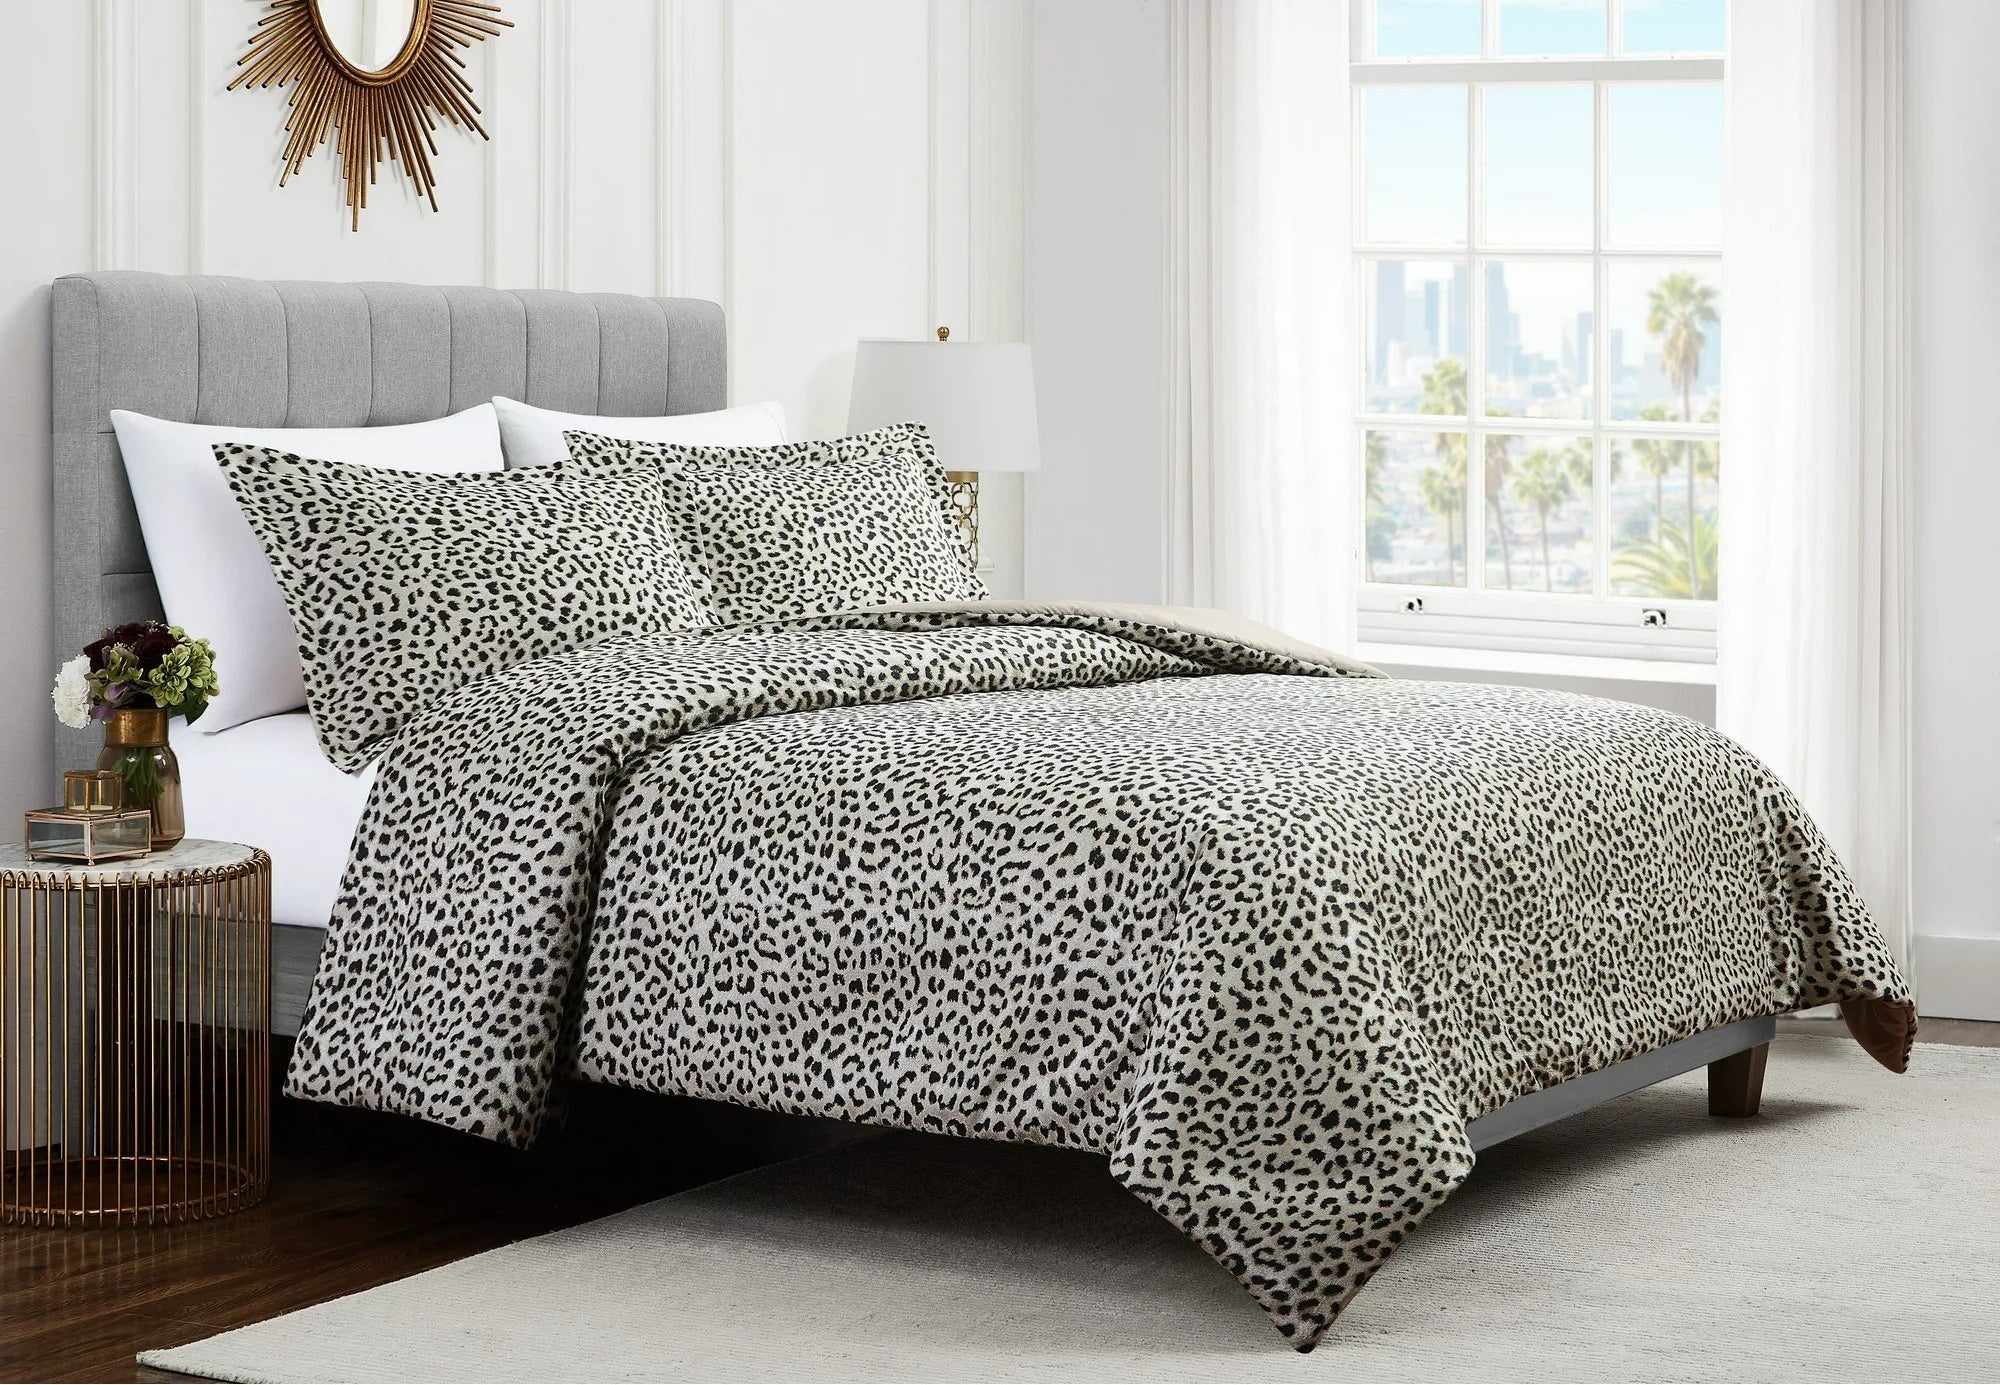 Leopard comforter set with matching shams on bed